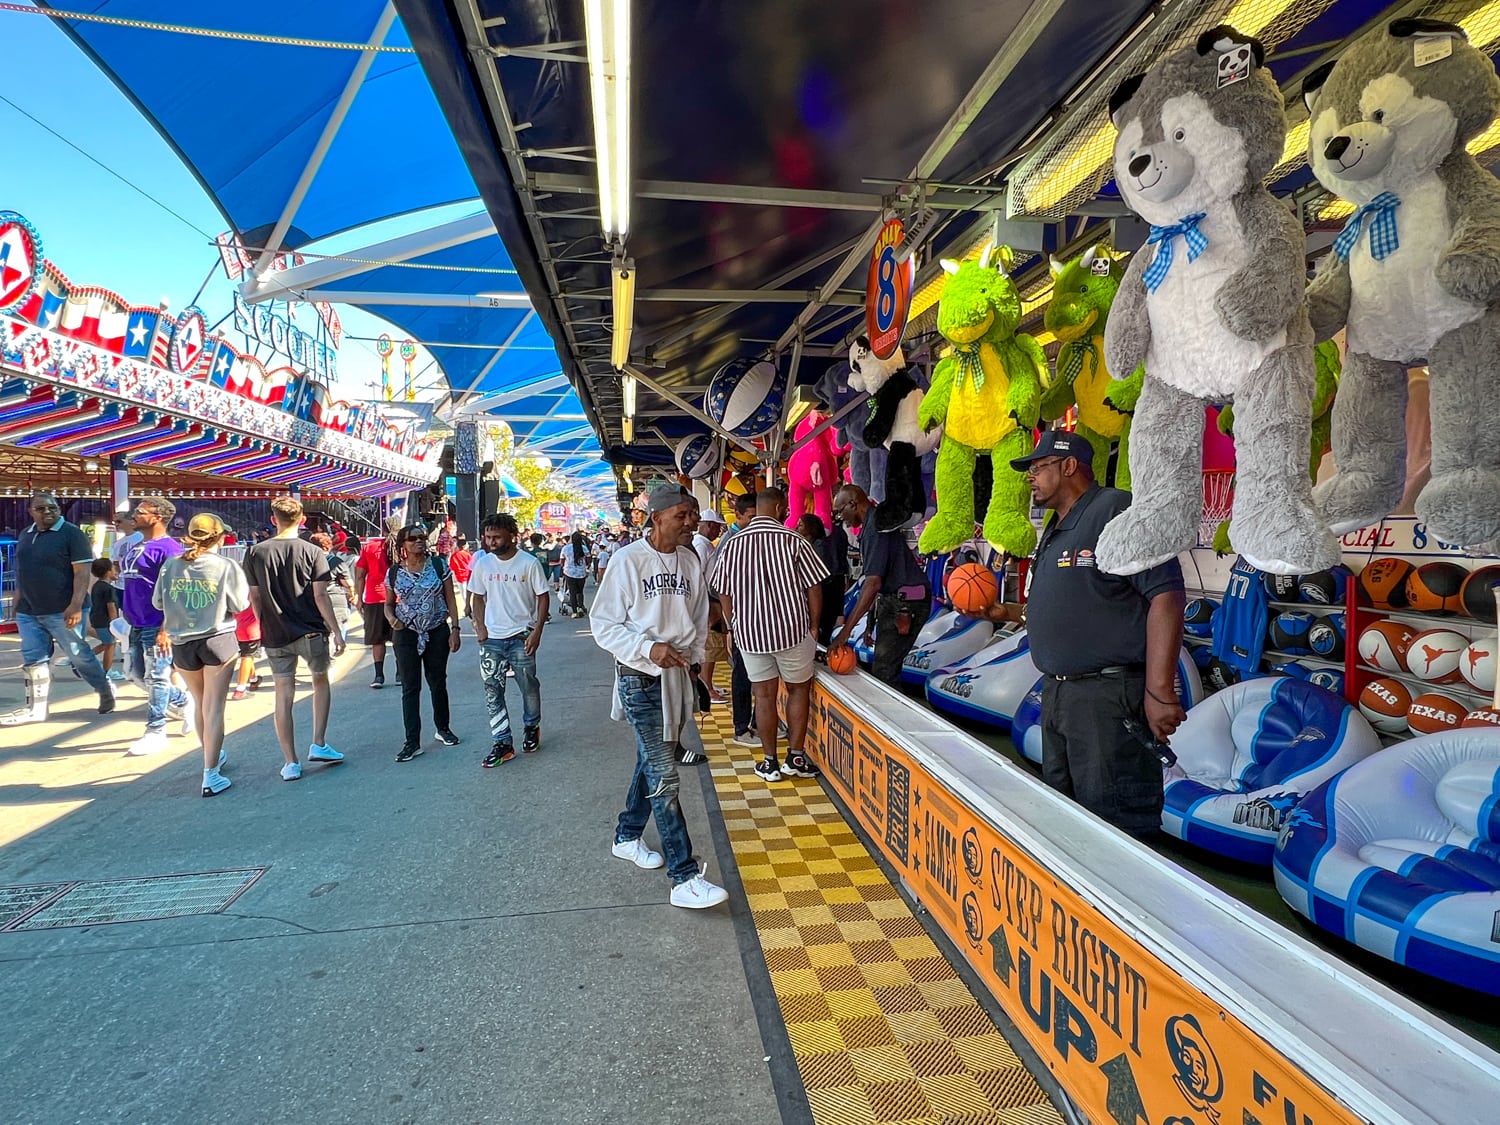 Walking through a gauntlet of Midway carnival games